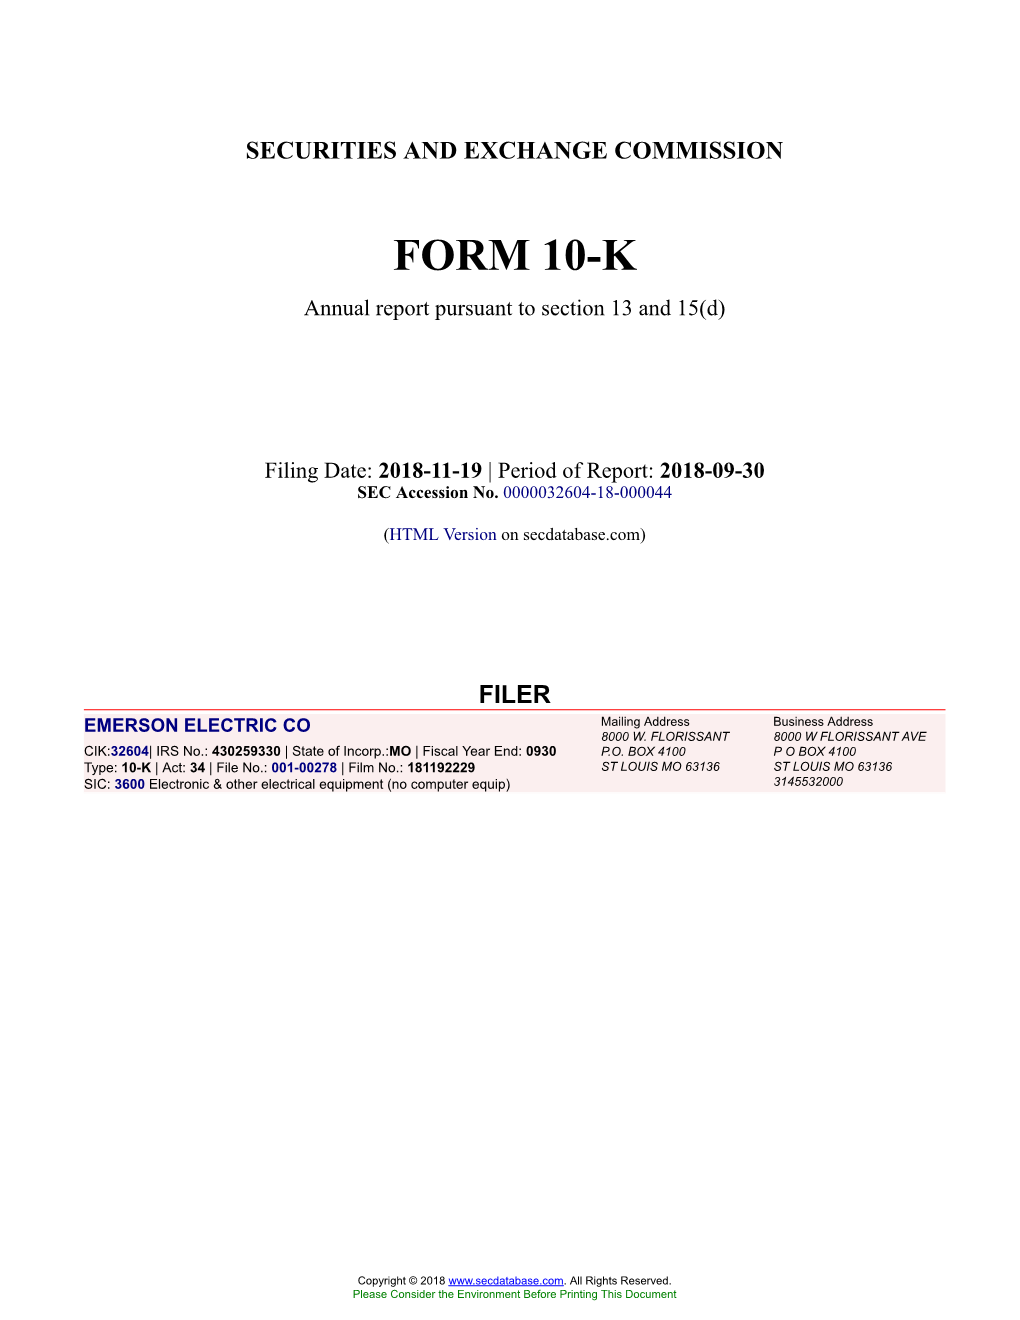 EMERSON ELECTRIC CO Form 10-K Annual Report Filed 2018-11-19